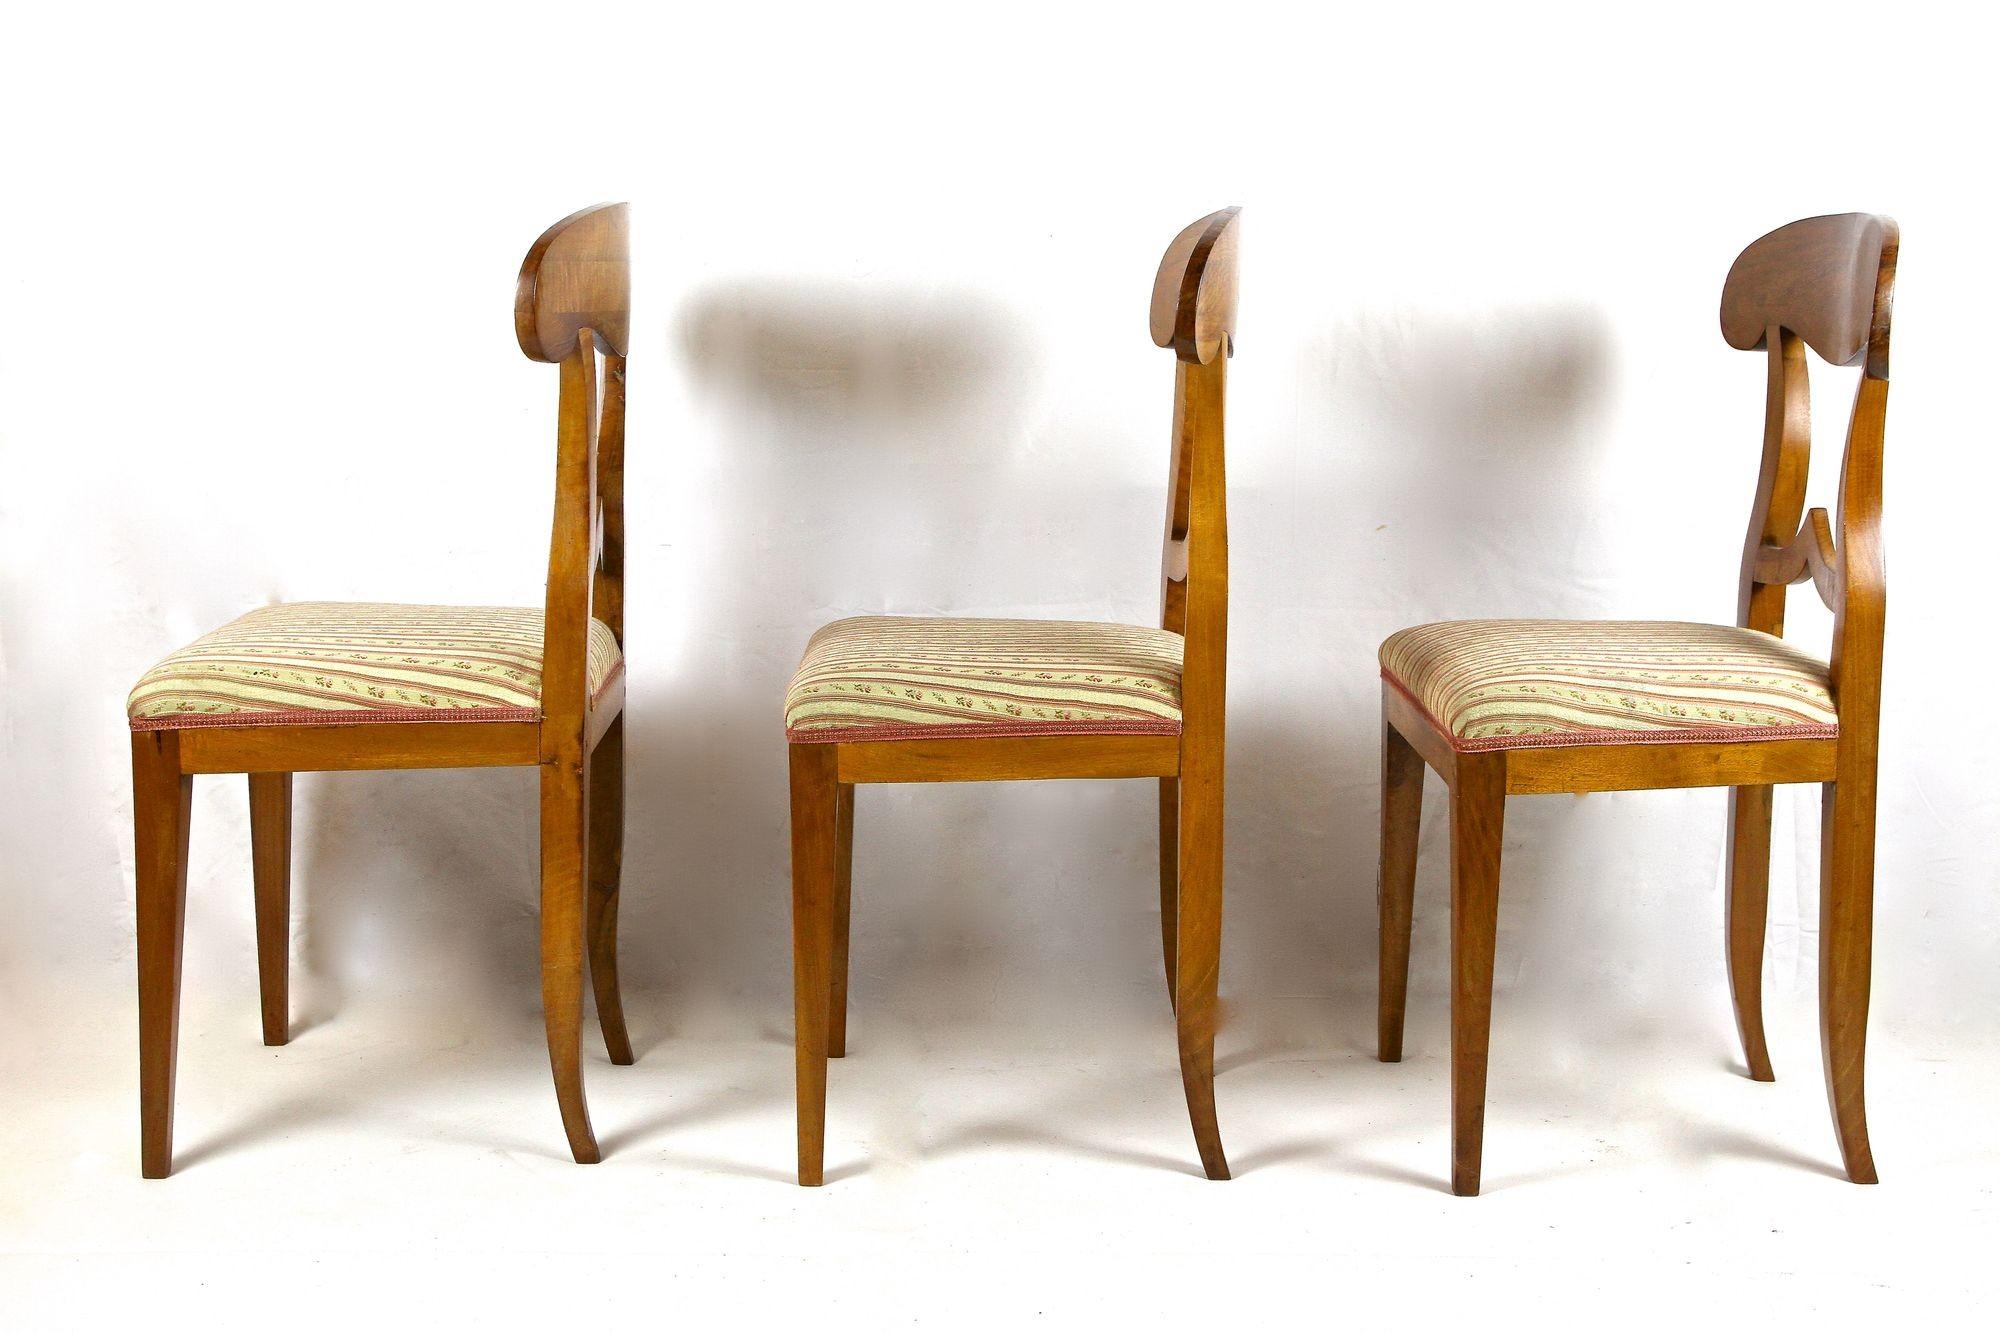 Set Of 6 Biedermeier Nutwood Shovel Dining Chairs, 19th Century, AT ca. 1830 For Sale 1